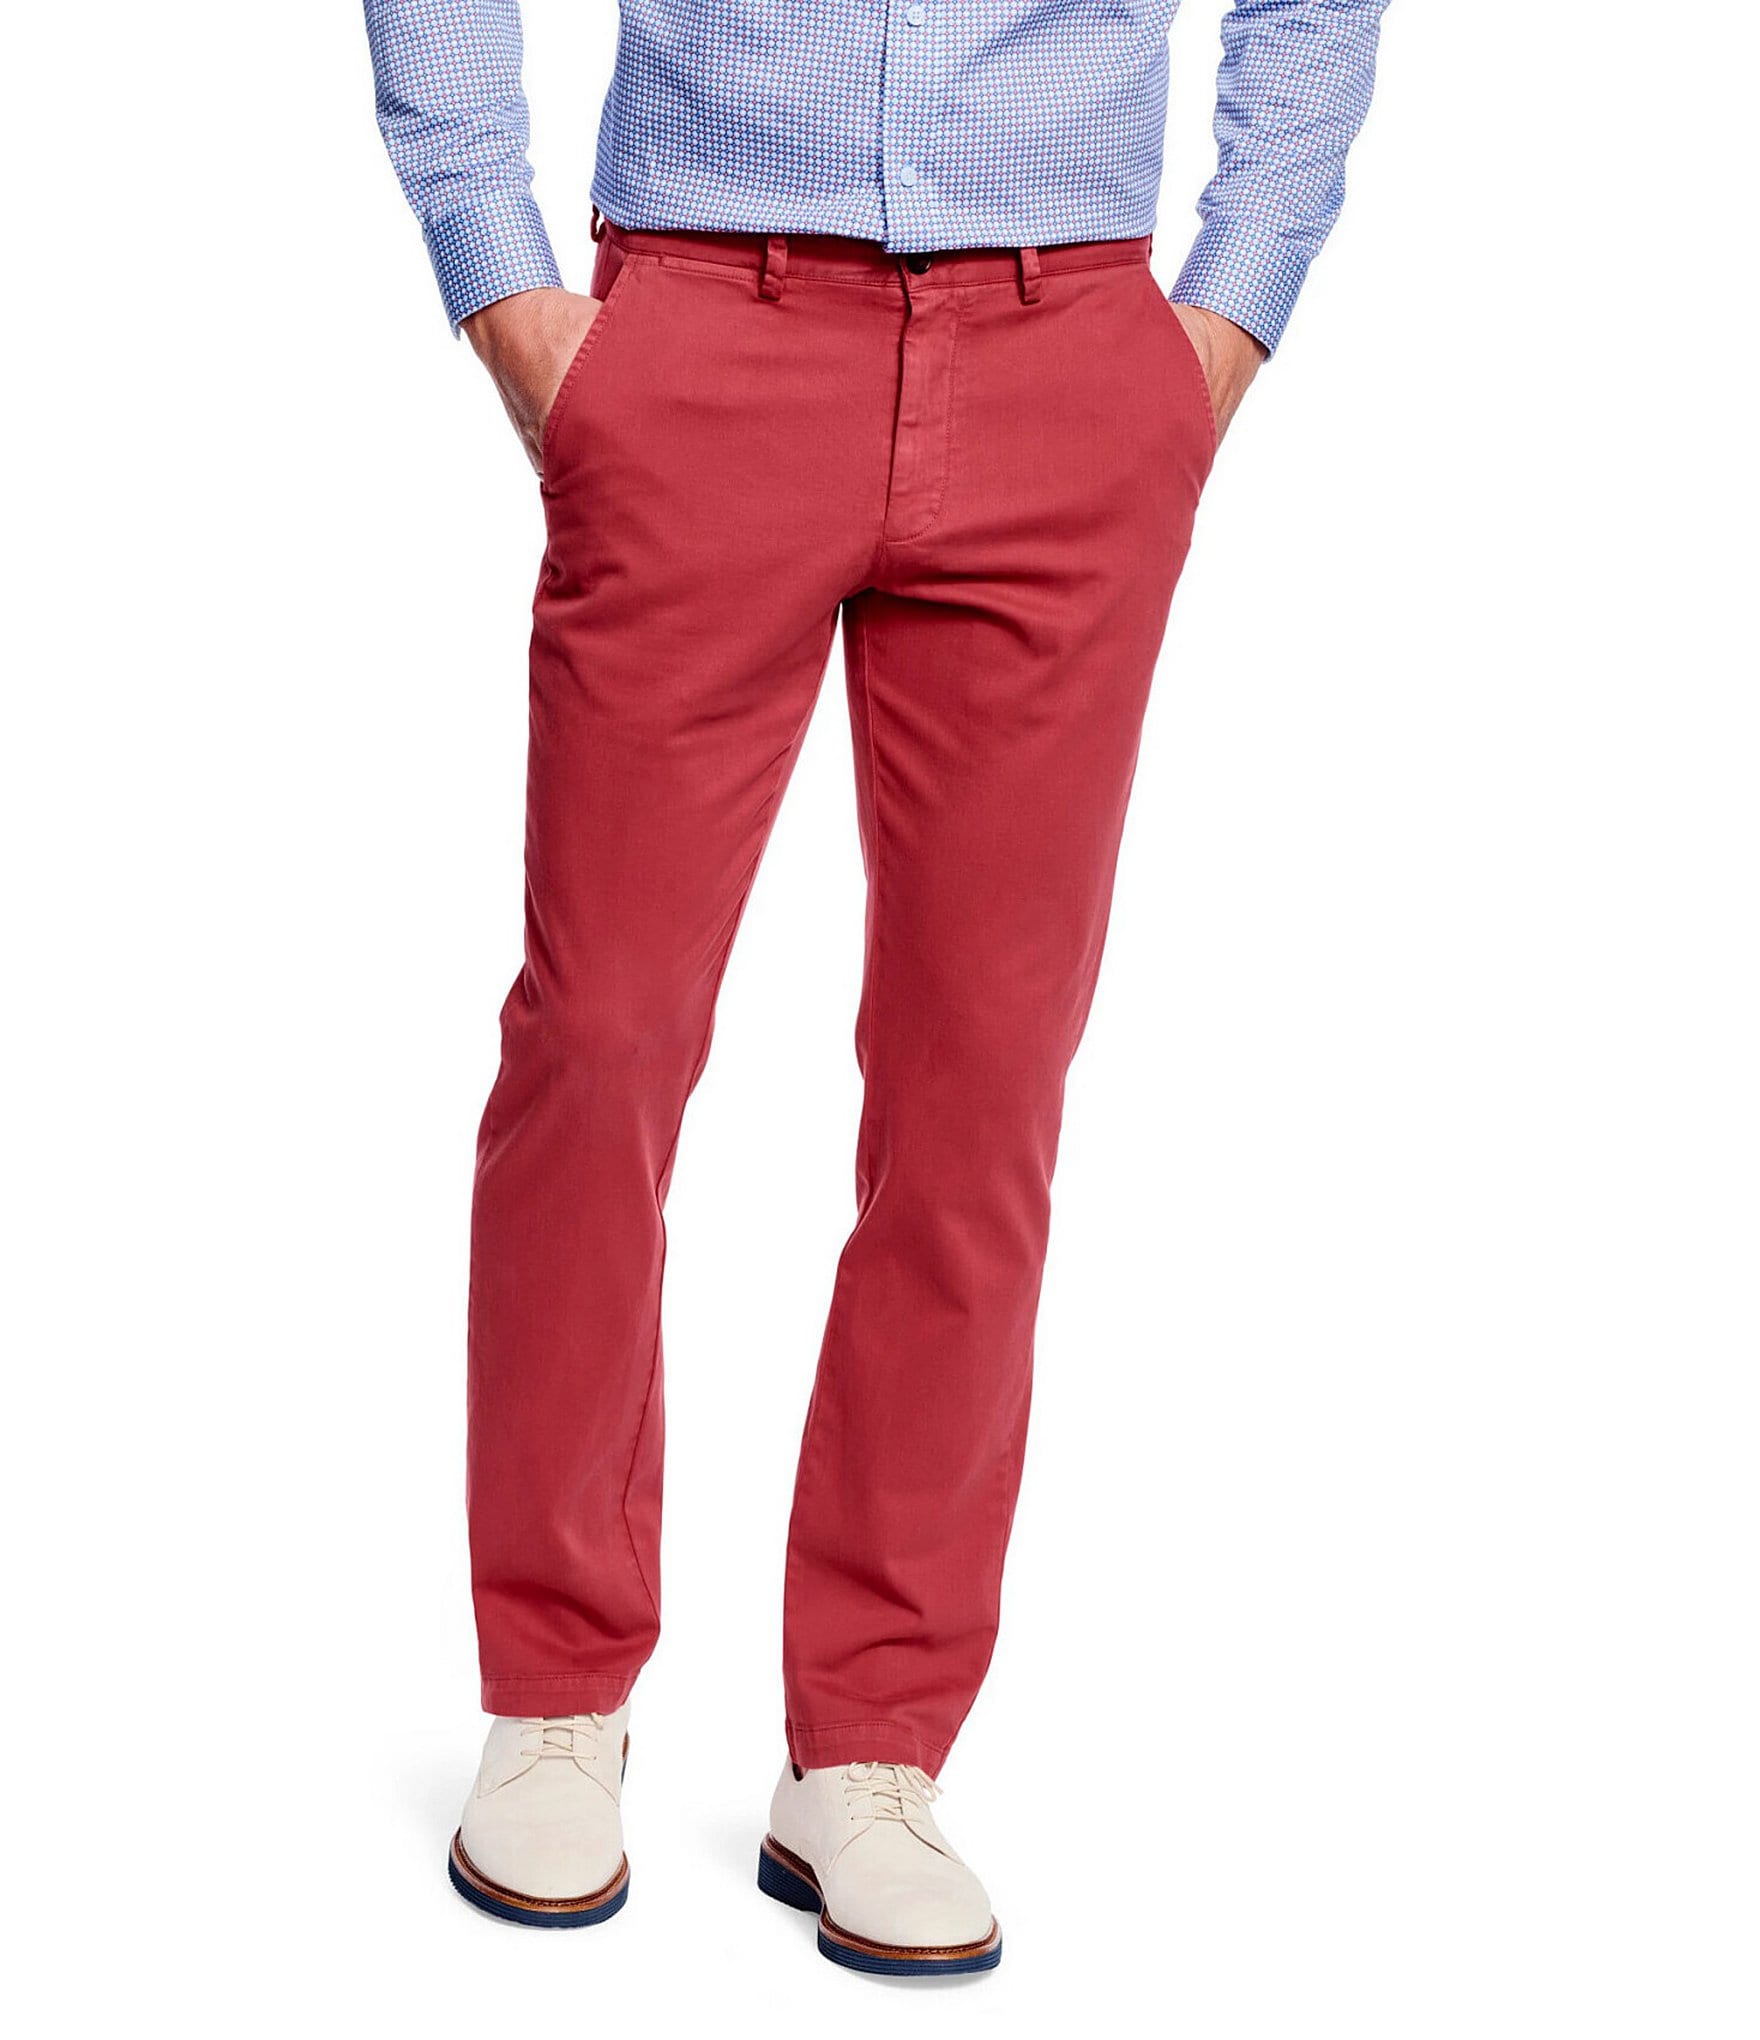 Mens Dress Pants Formal Business Straight Leg Trousers Wedding Stage  Costume Red | eBay